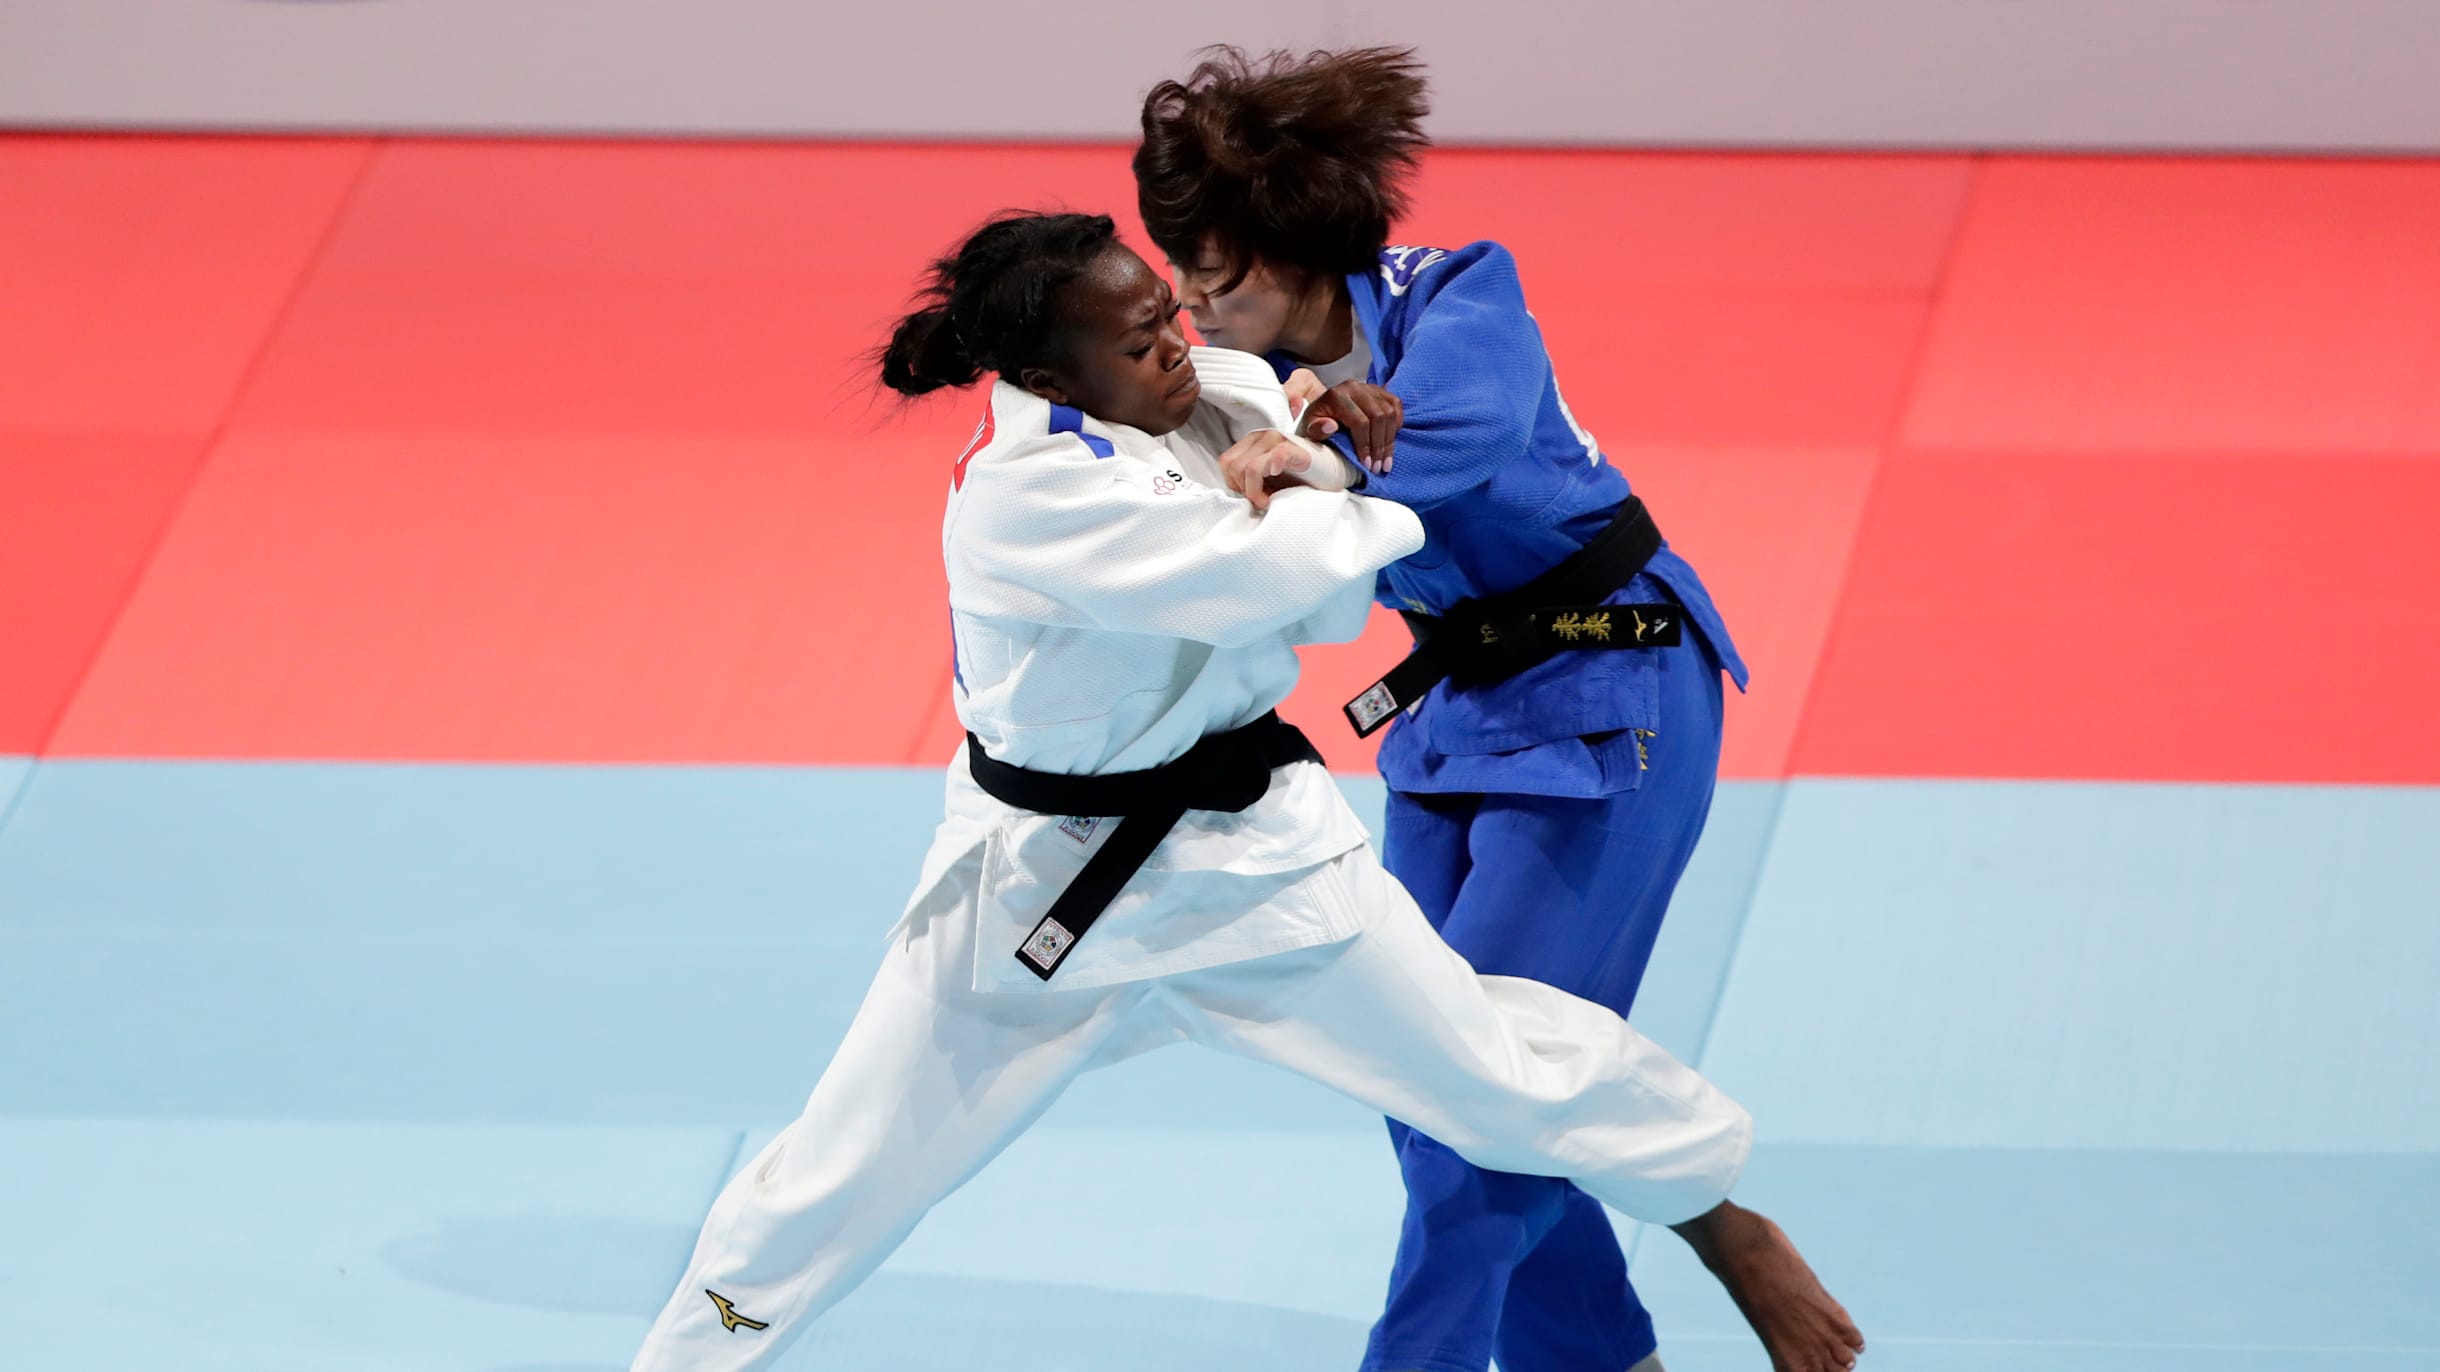 Clarisse Agbegnenou wins historic fifth World judo title